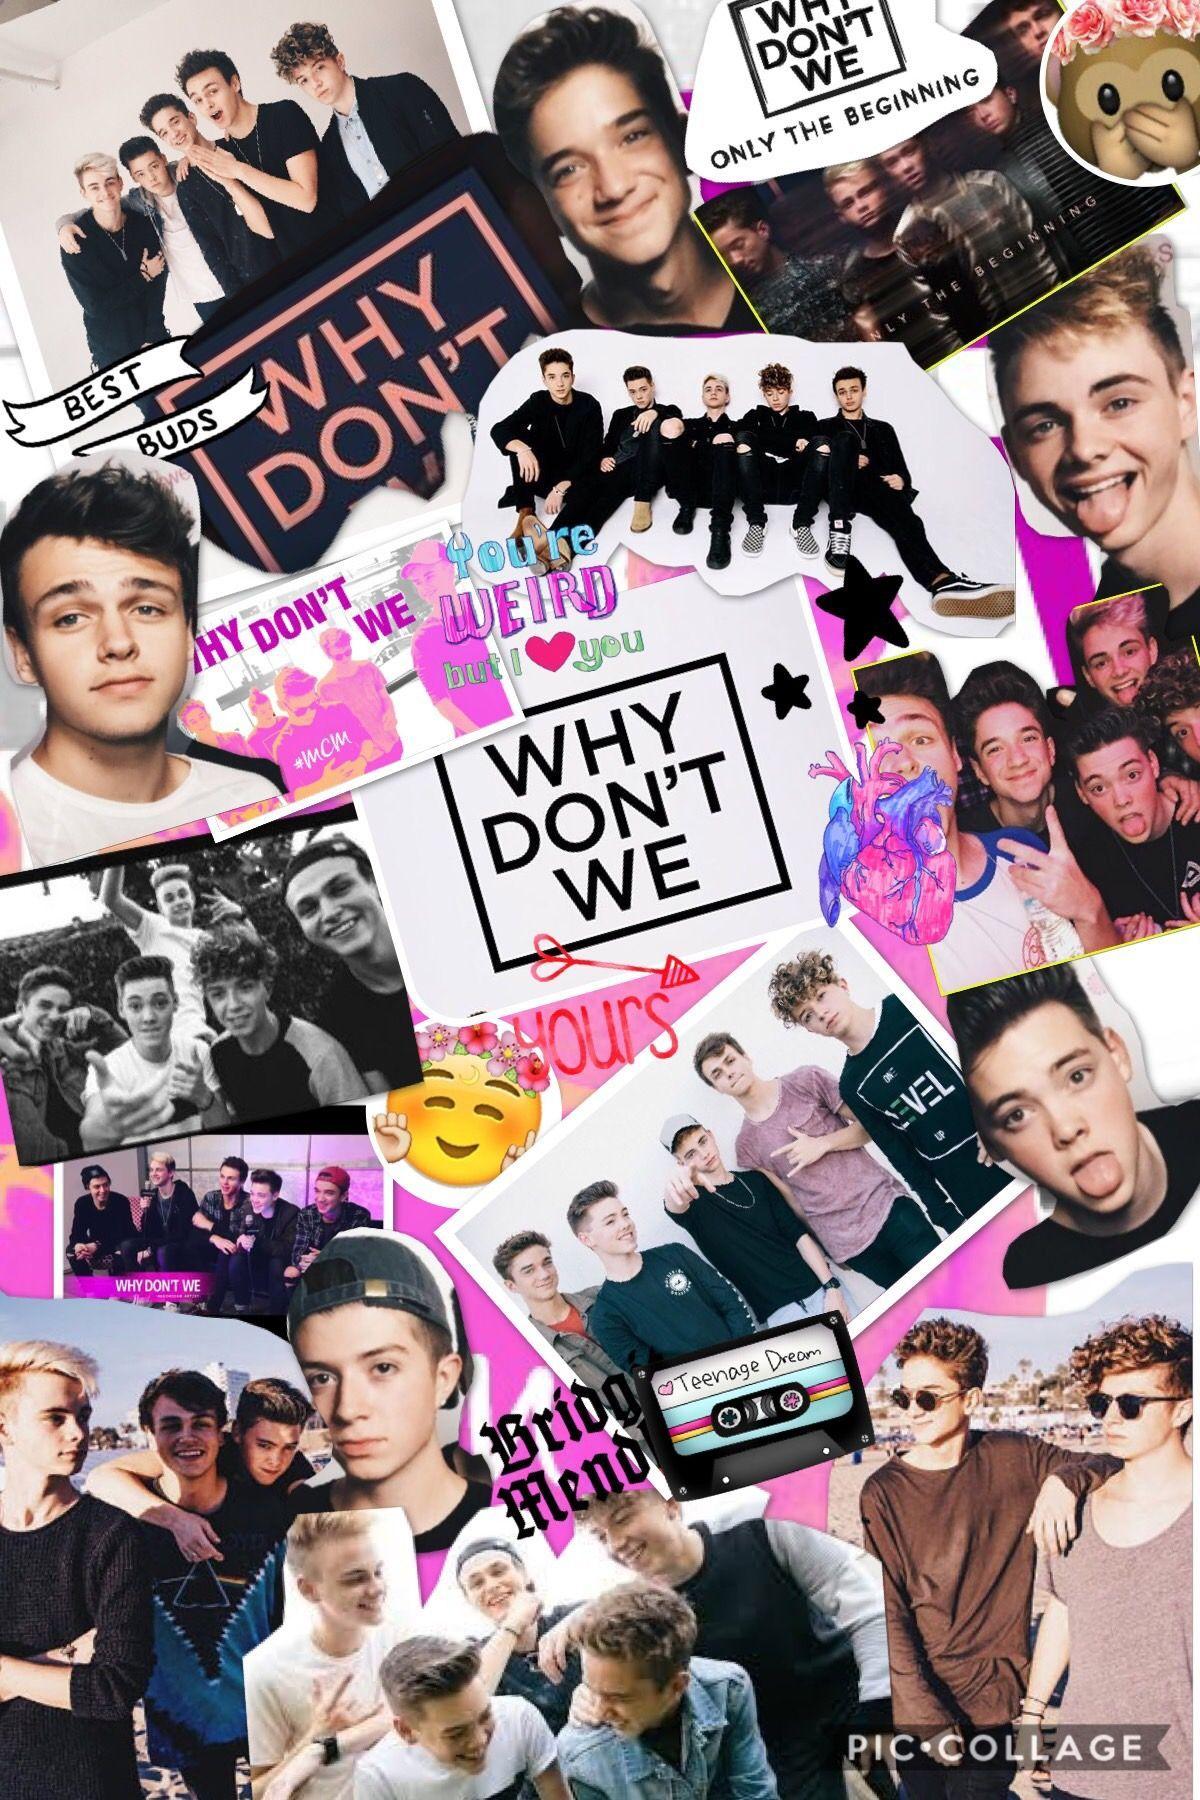 Why don't we band wallpaper. Why don't we band in 2018